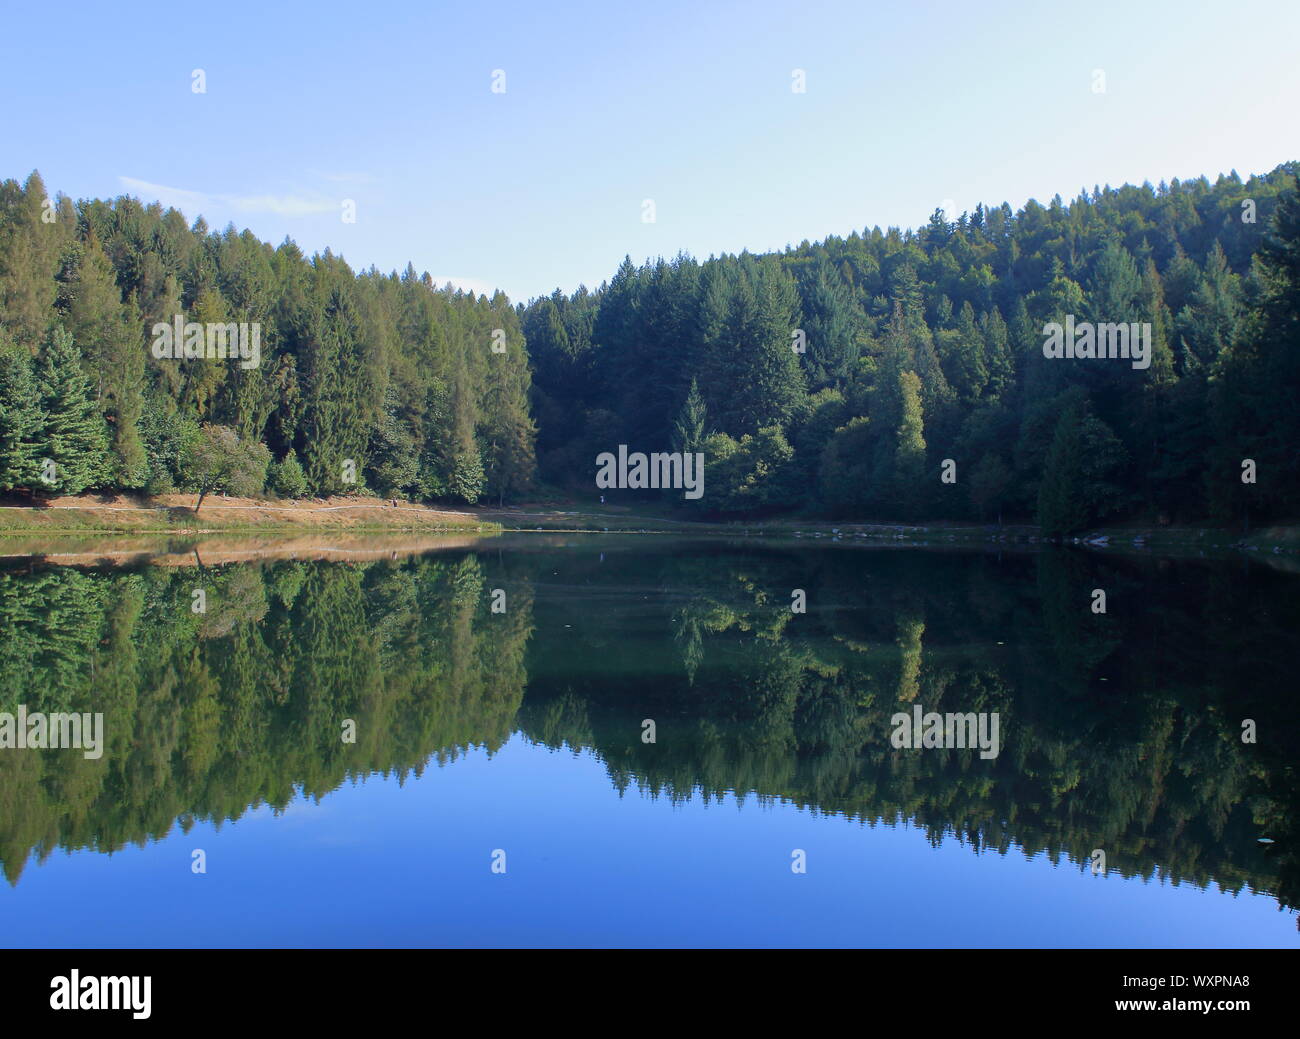 Alpine lake with coniferous forest in the background and its reflection on the water, Valchiusella, Piedmont region, Italy Stock Photo